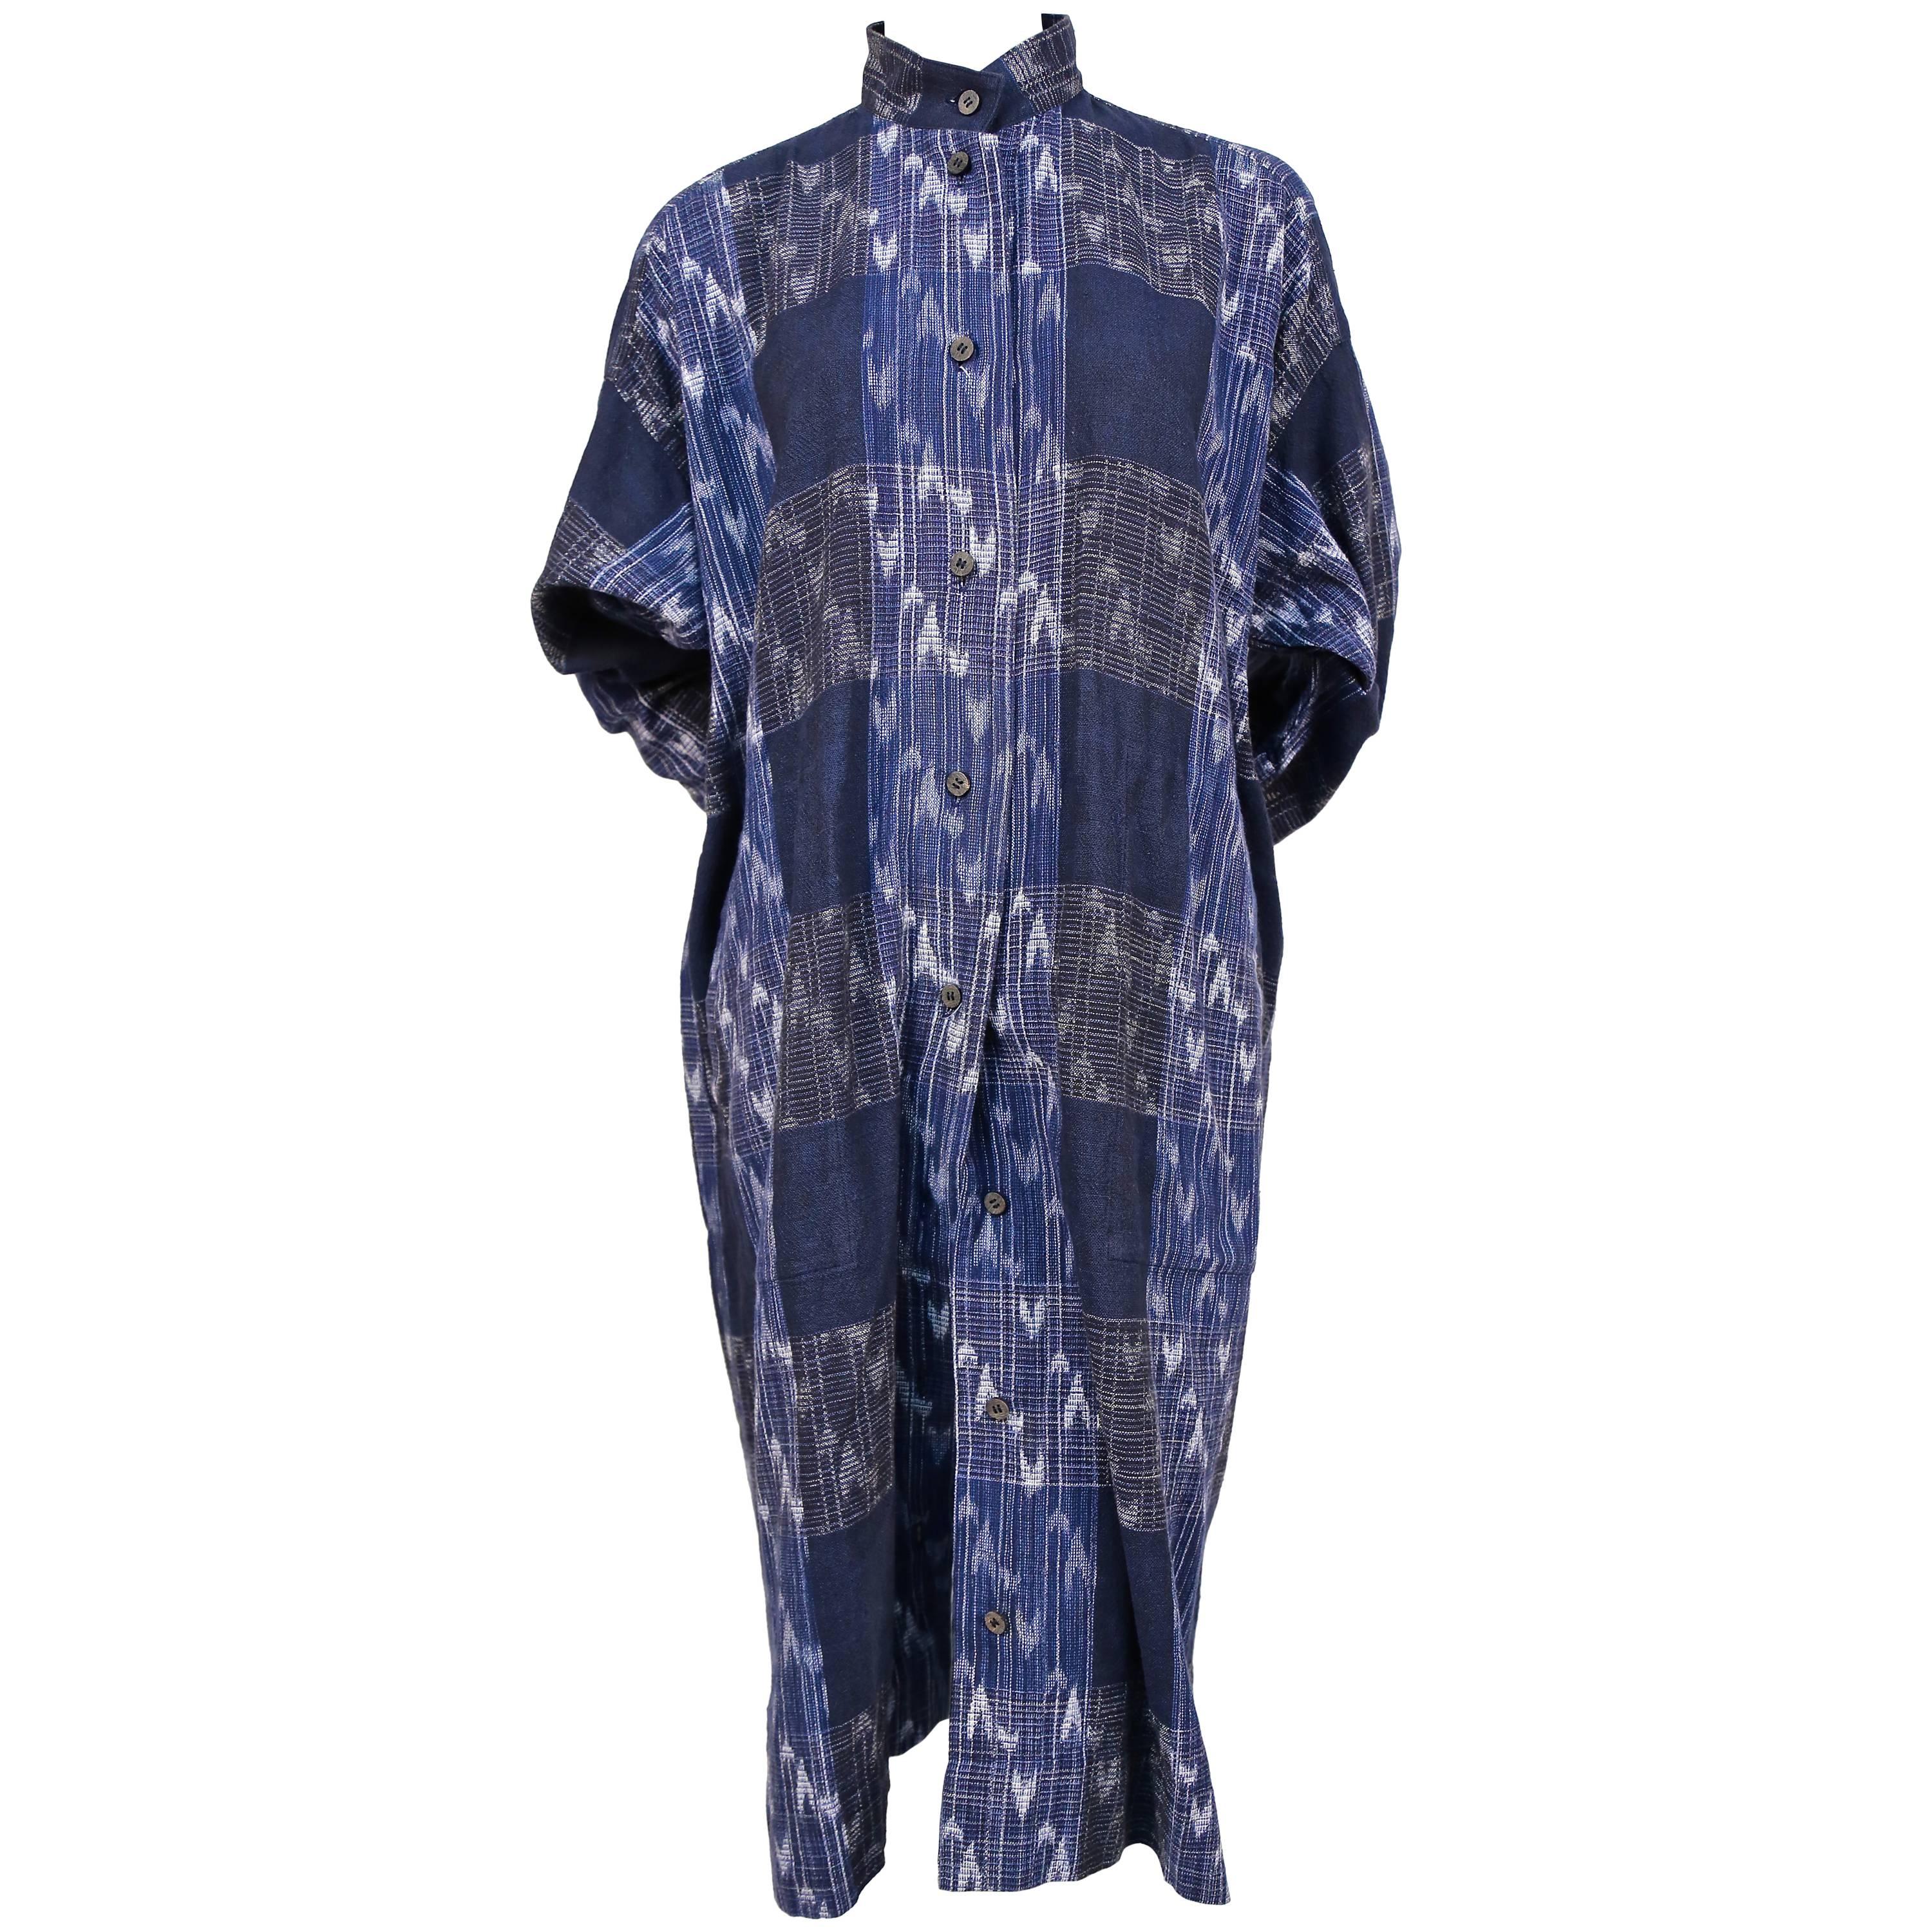 1980's ISSEY MIYAKE blue Ikat woven dress with wood buttons